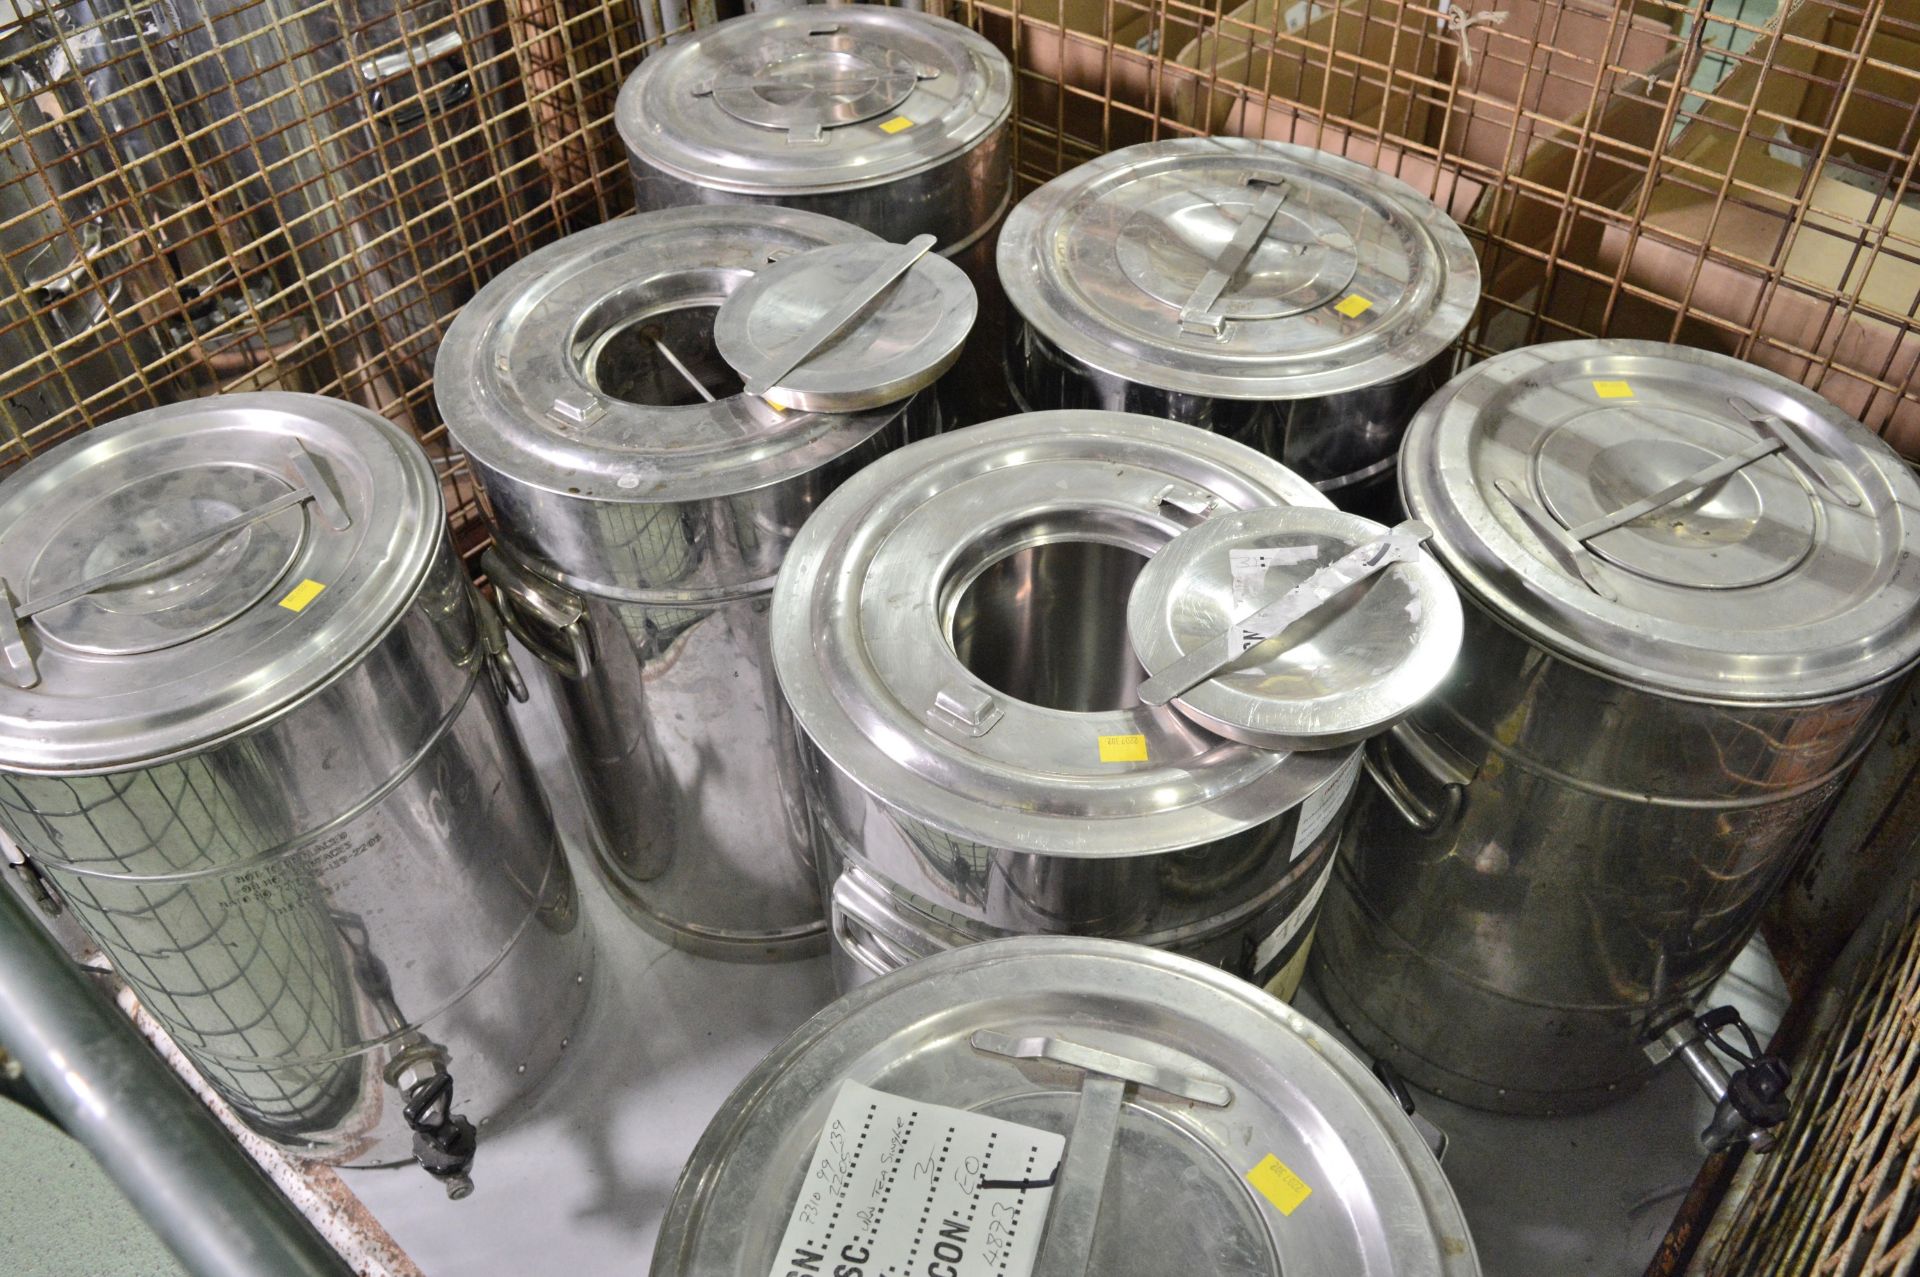 7x Insulated Tea Urns - Not heated. - Image 2 of 3